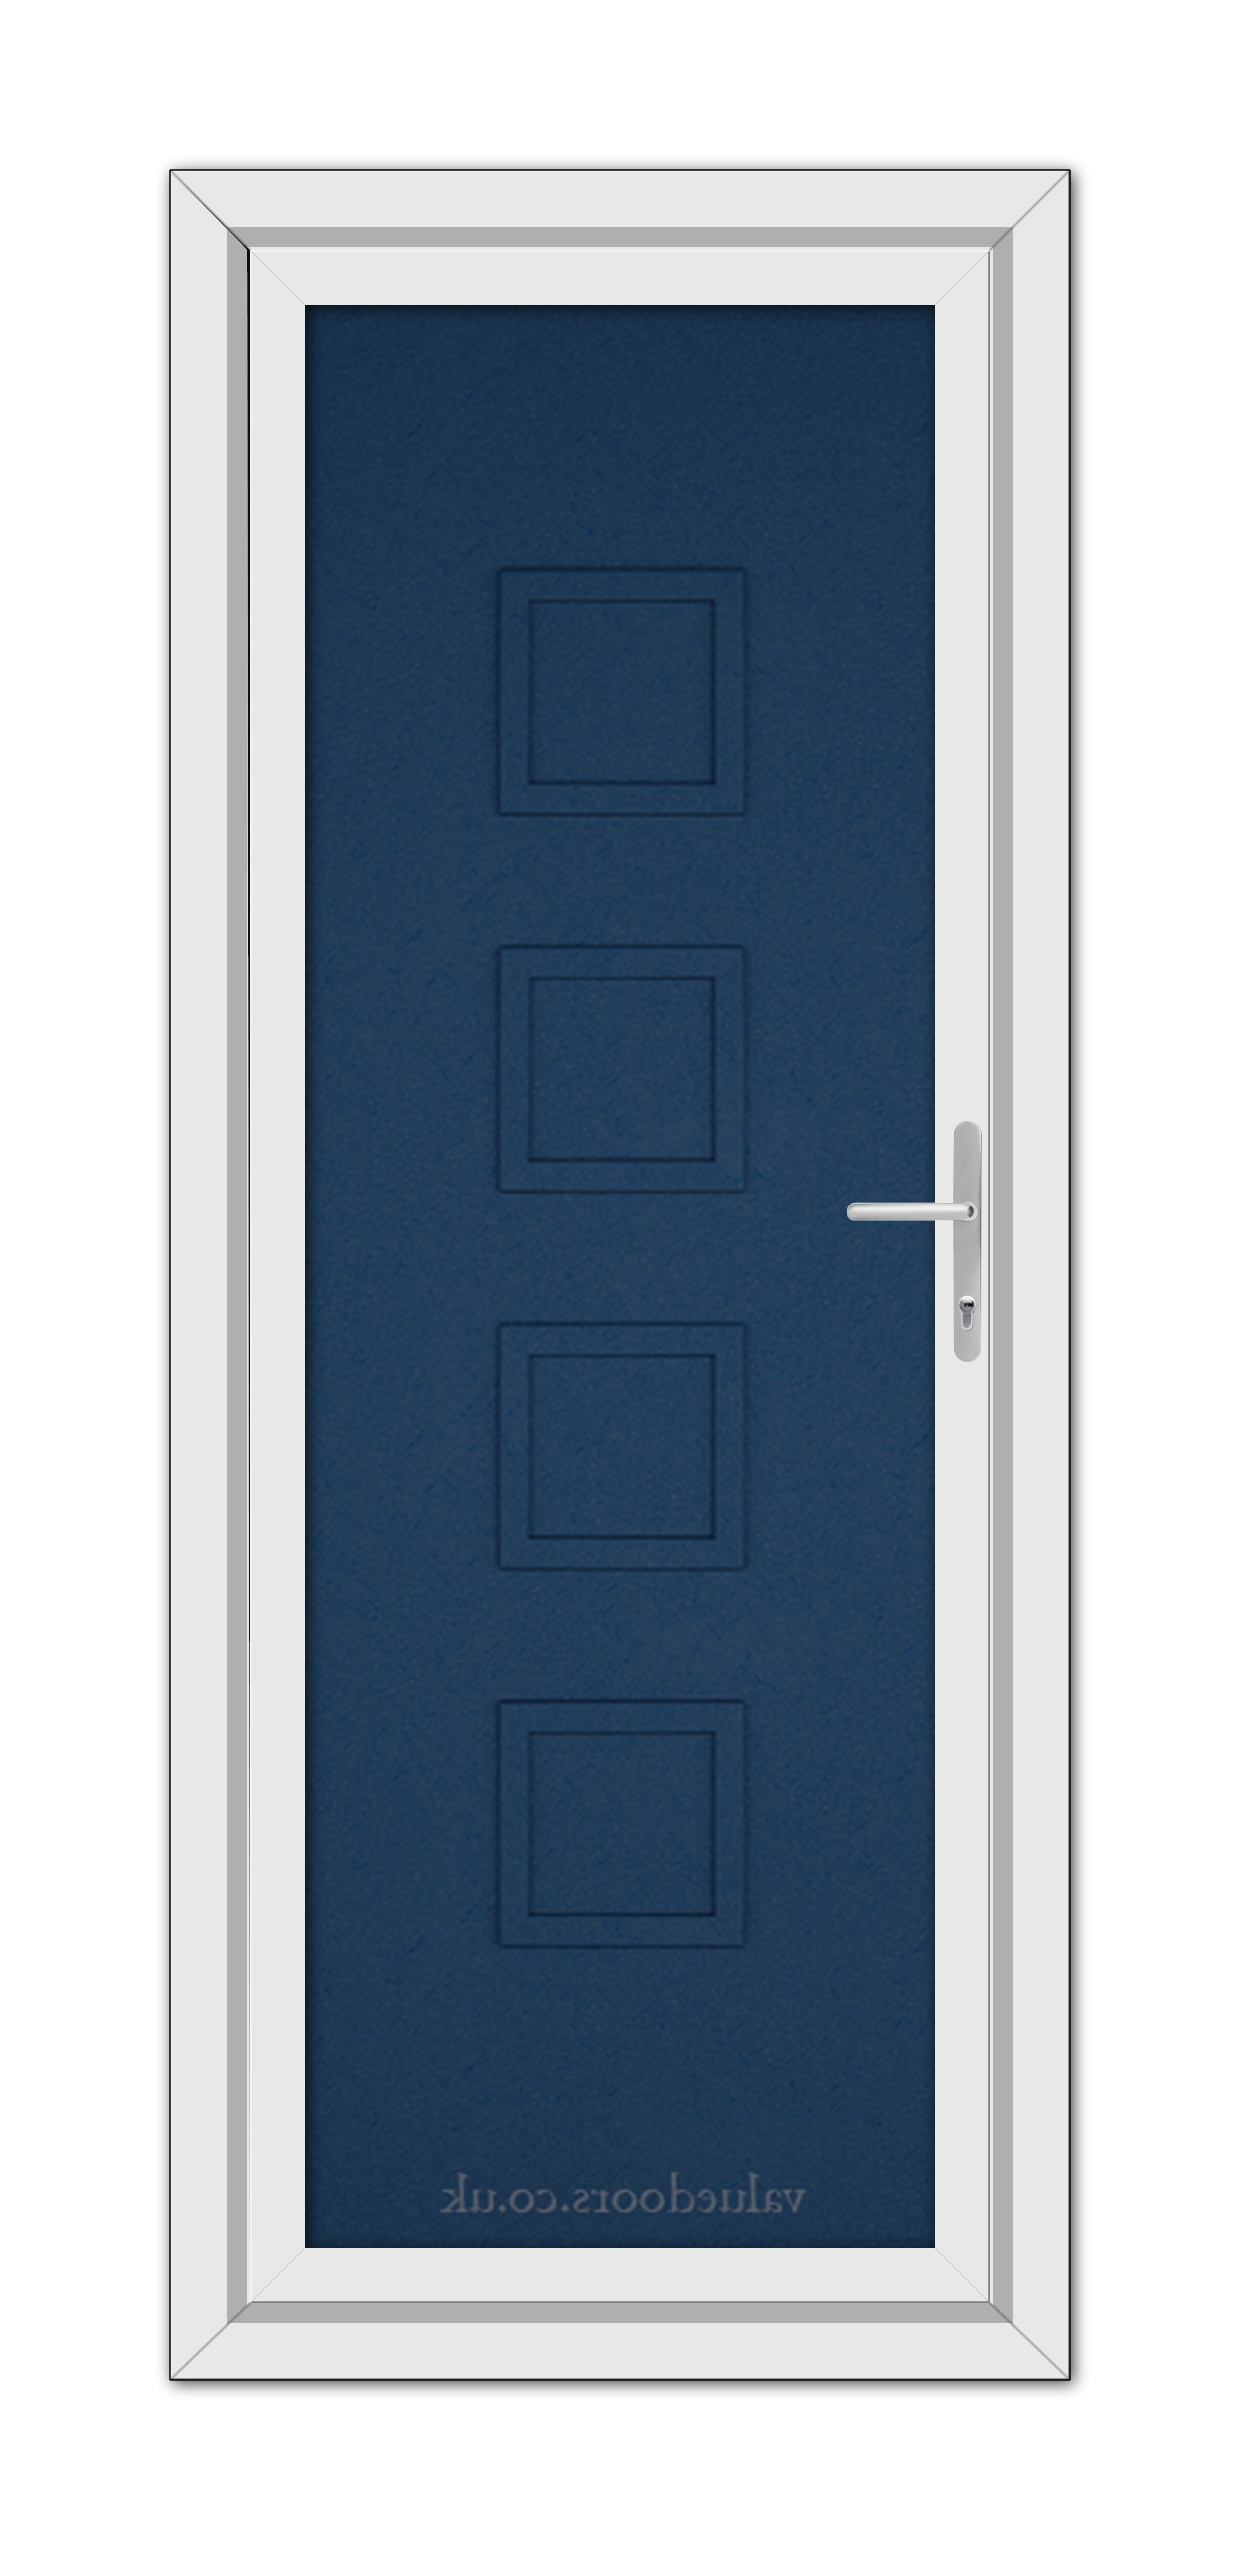 A vertical image of a Blue Modern 5034 Solid uPVC Door with six panels and a white frame featuring a silver handle on the right side.